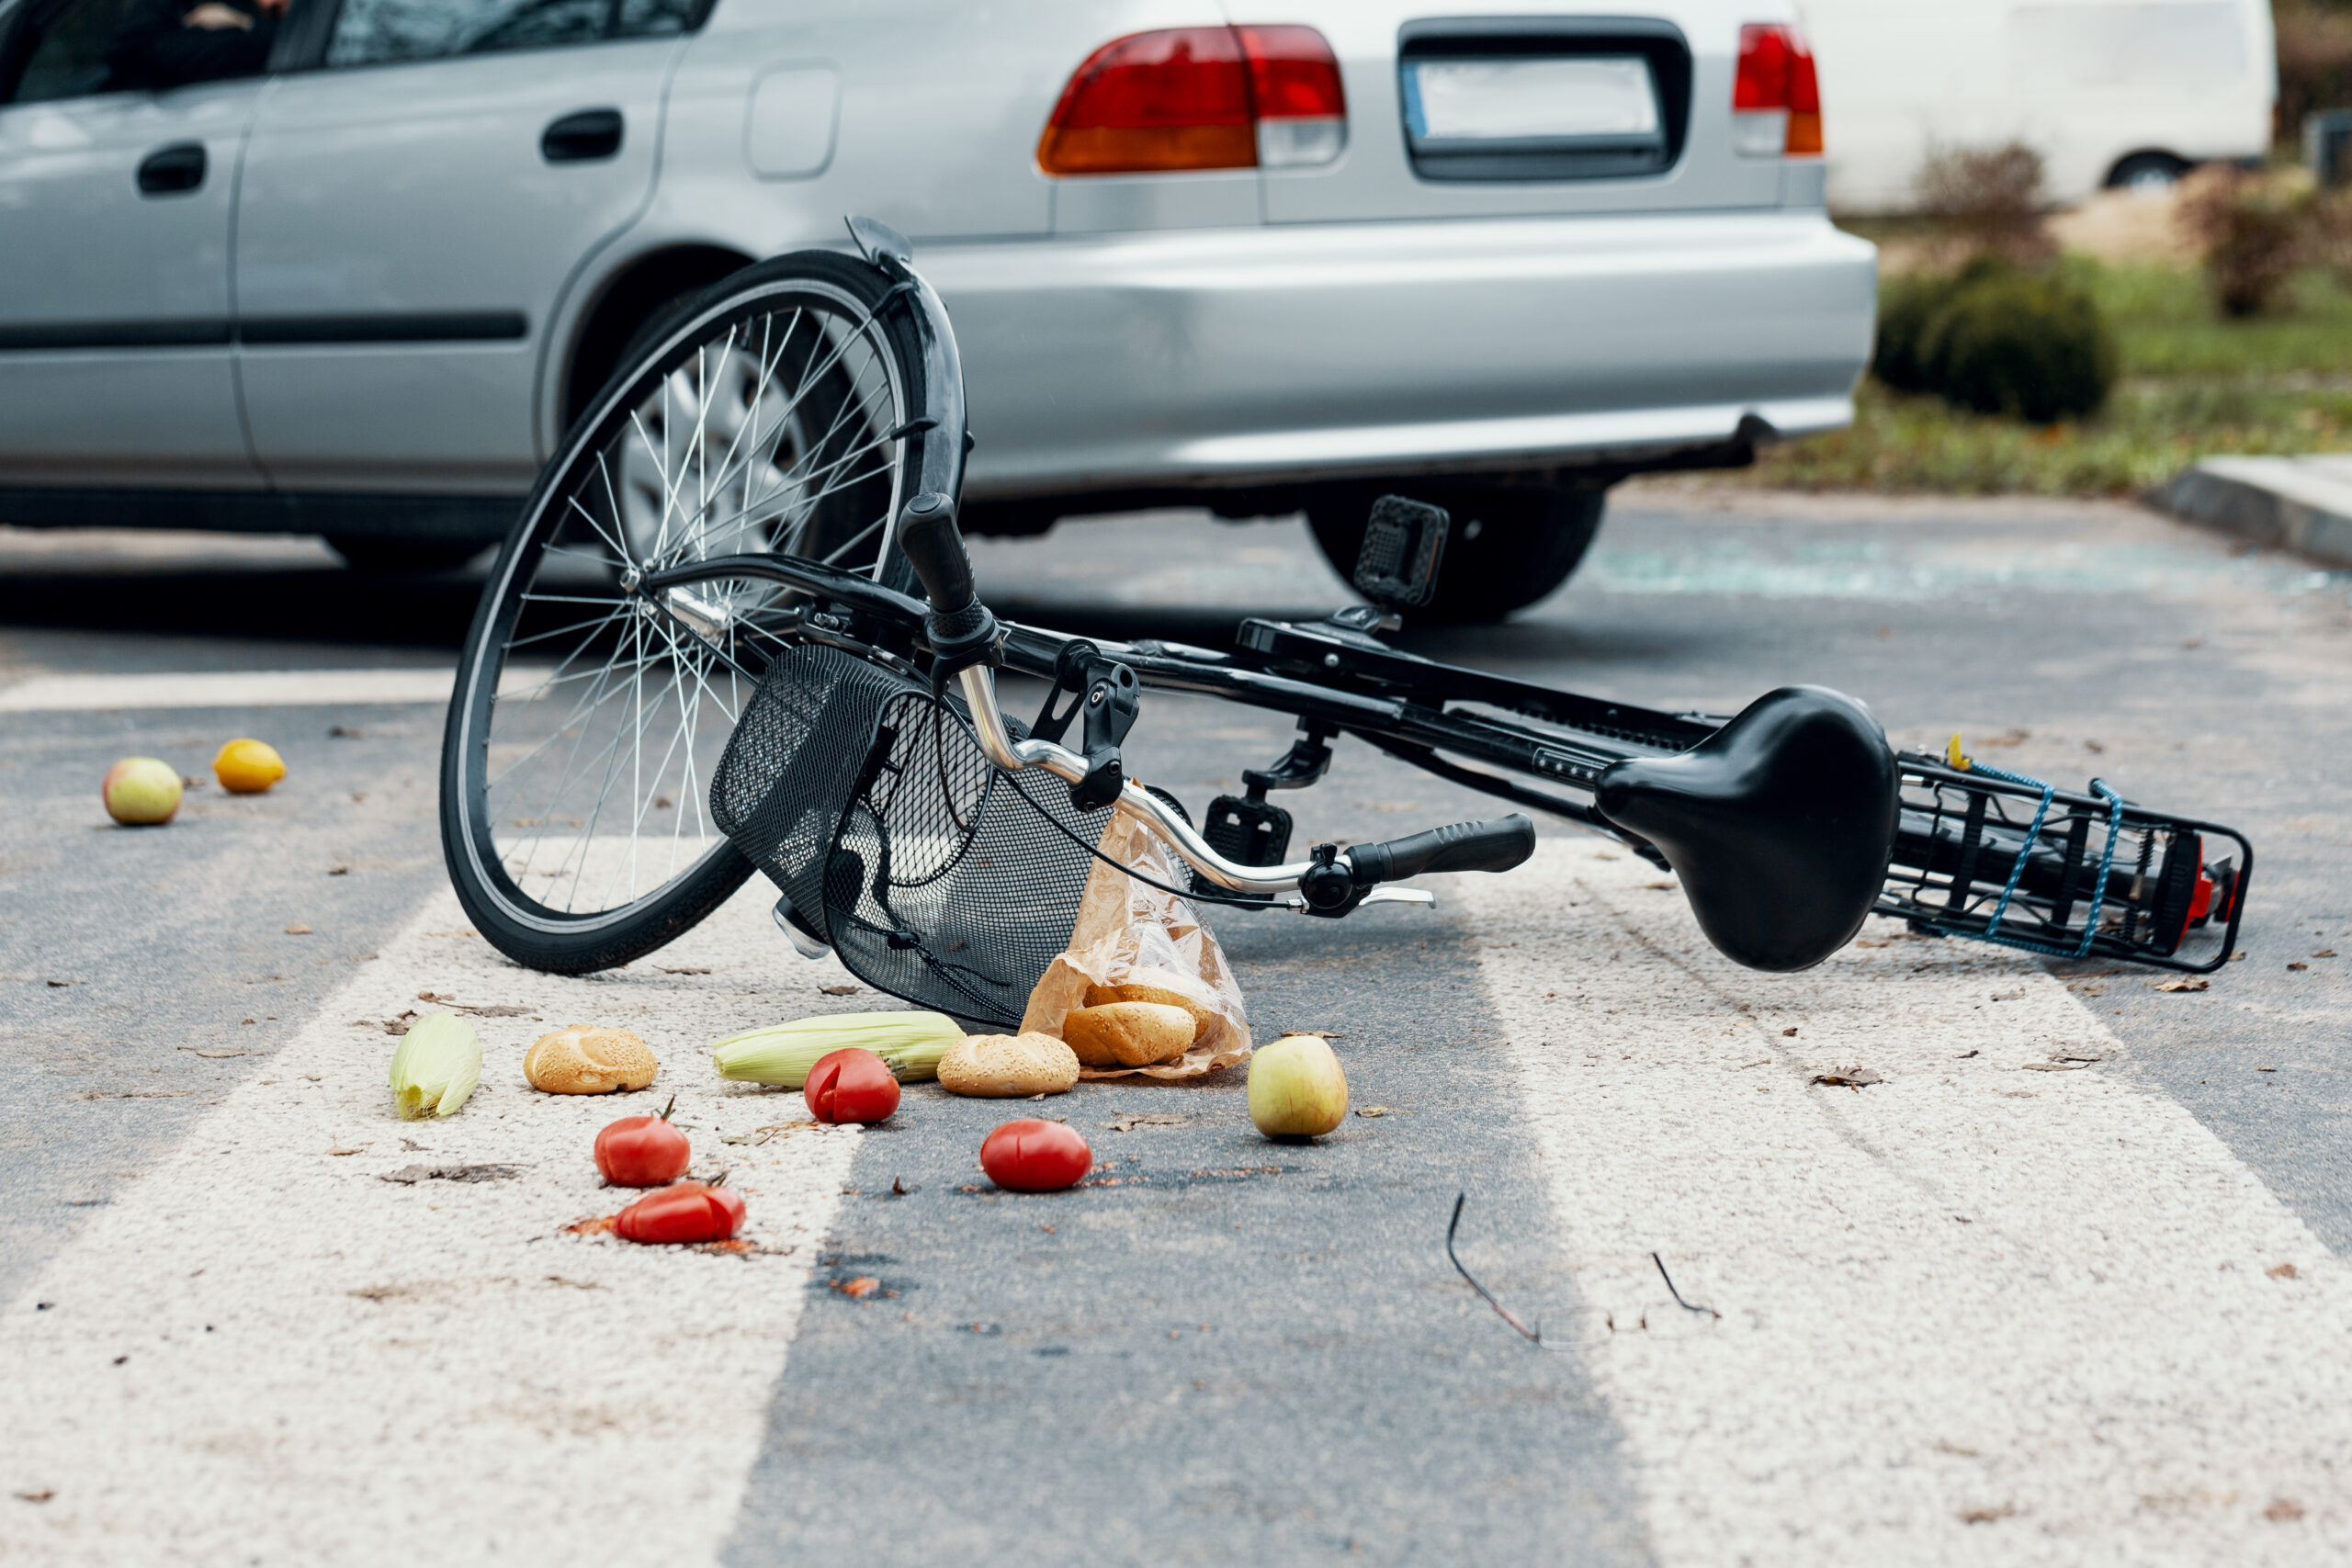 How Long Does a Bicycle Accident Claim Take